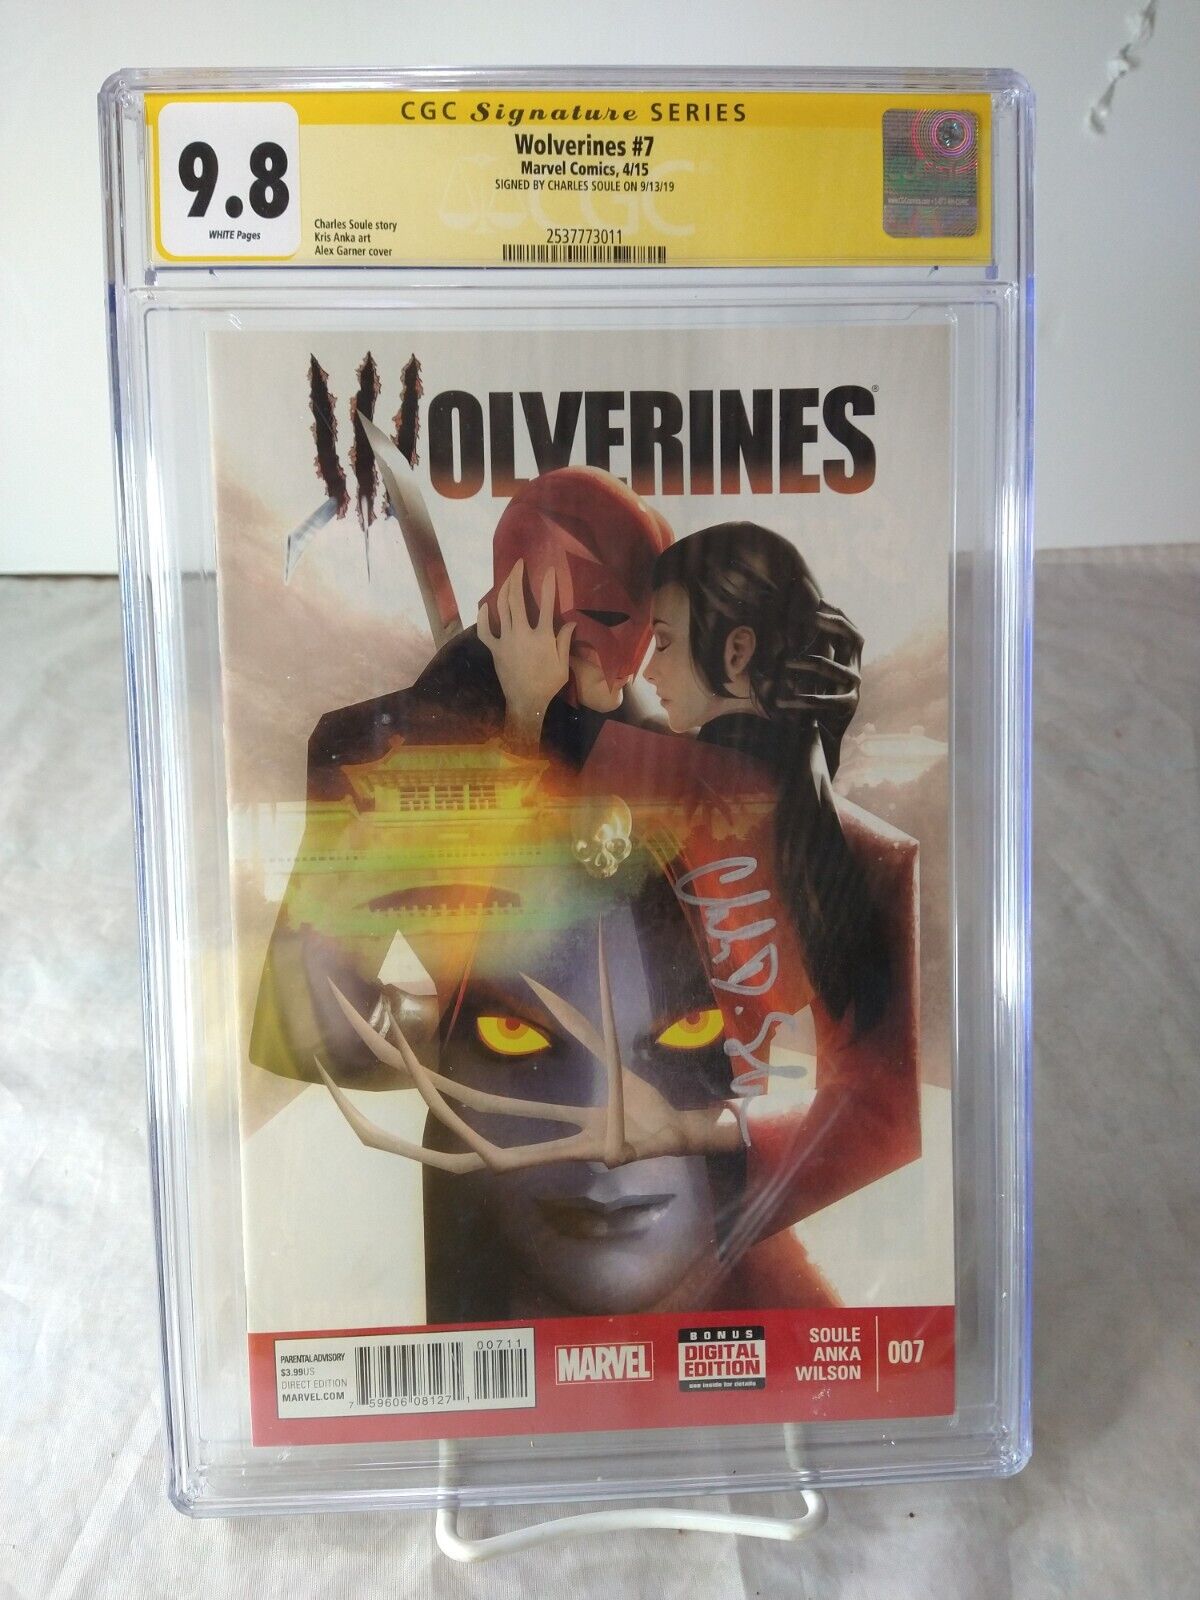 Wolverines #7 CGC 9.8 Signed by Charles Soule